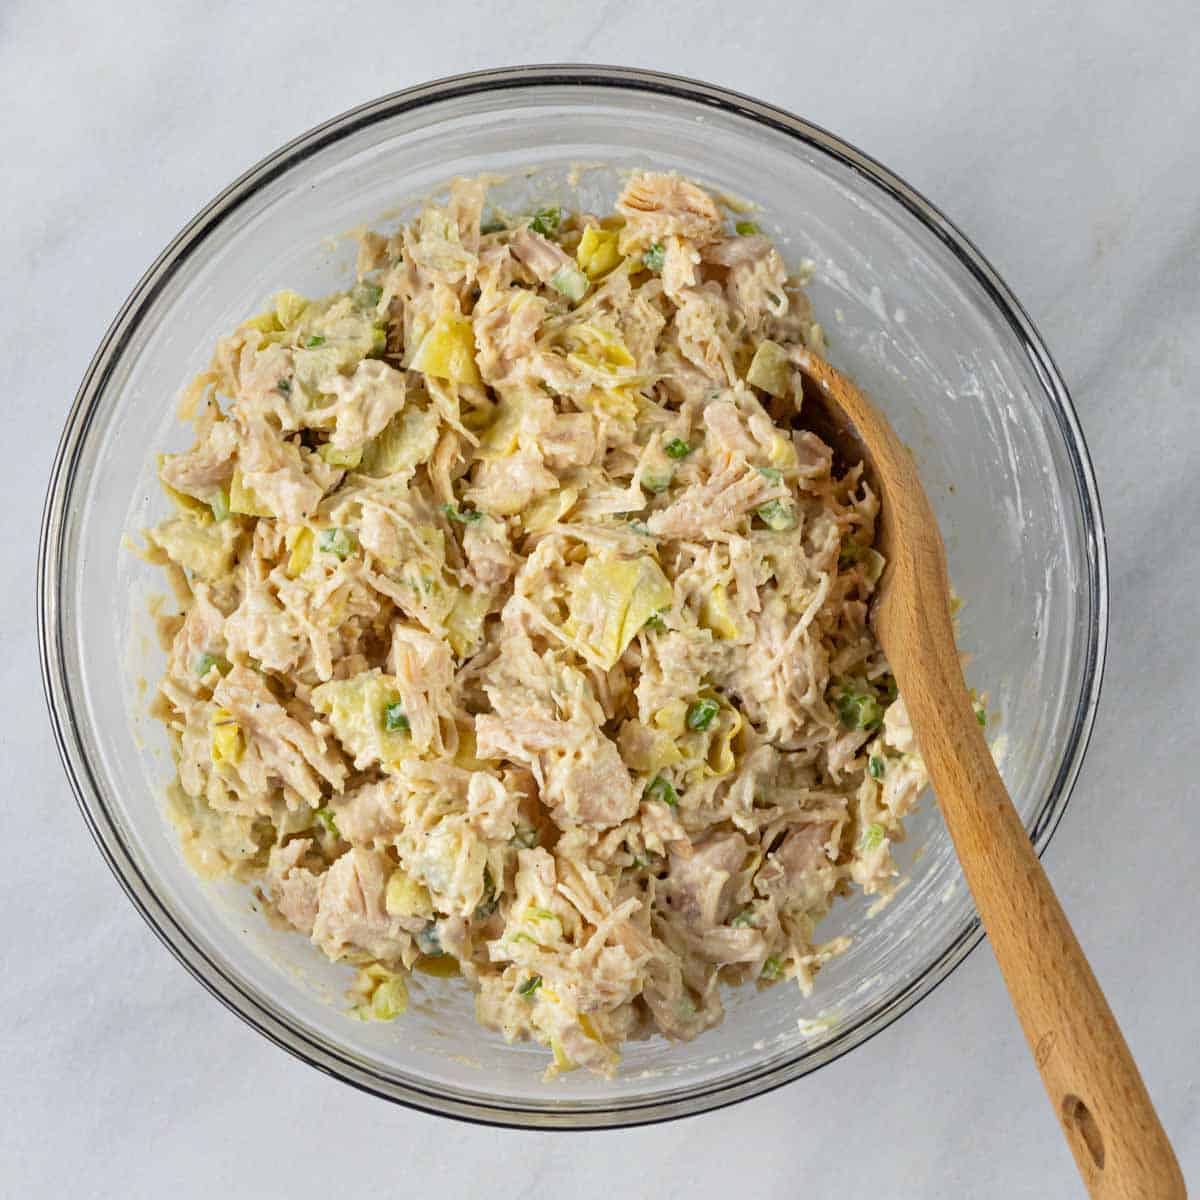 Low-FODMAP spicy chicken salad with jalapeños mixed ingredients in a glass bowl.